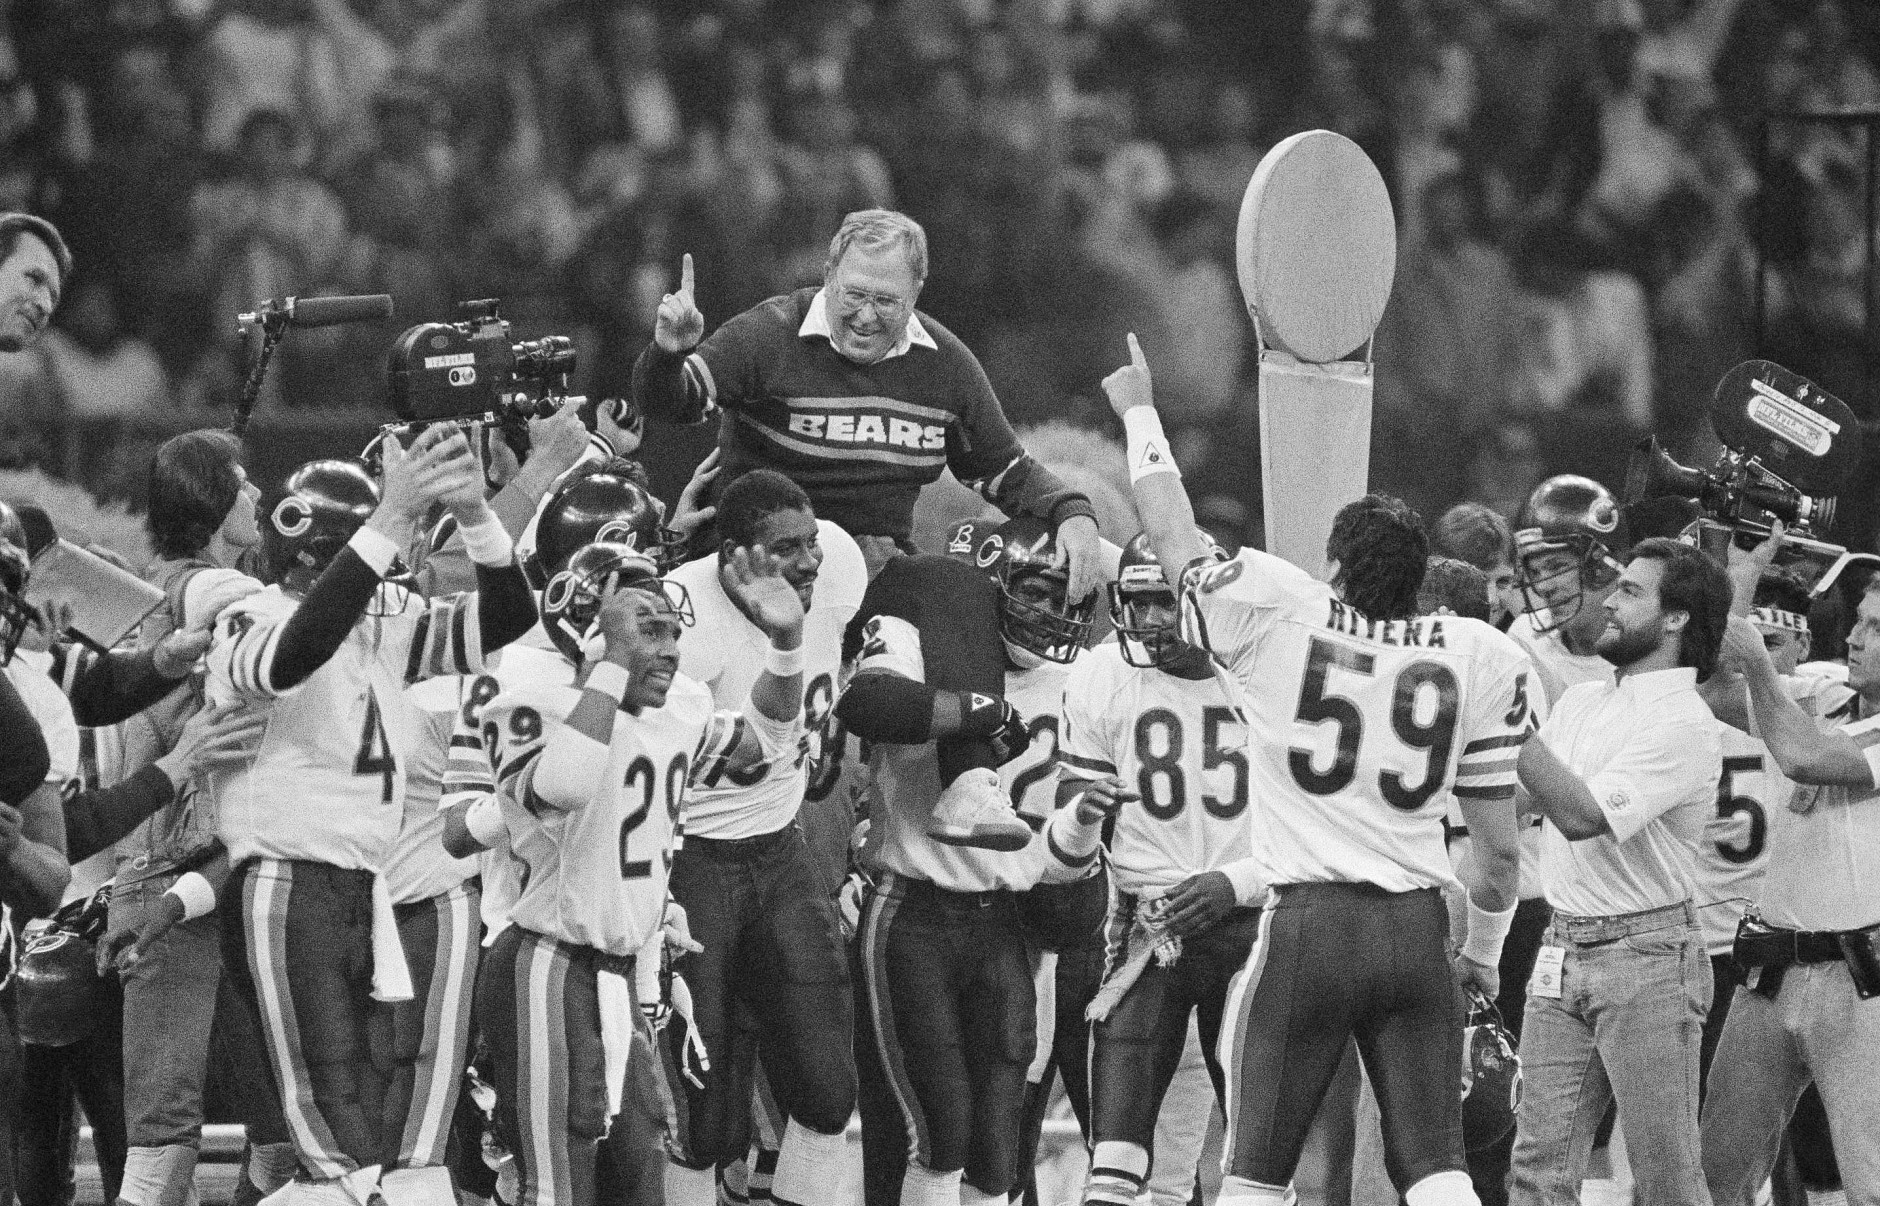 Chicago Bears defensive coordinator Buddy Ryan is carried off the field by the team after the Bears beat the New England Patriots 46-10, on Jan. 26, 1986 in New Orleans, to win Super Bowl XX. (AP Photo)